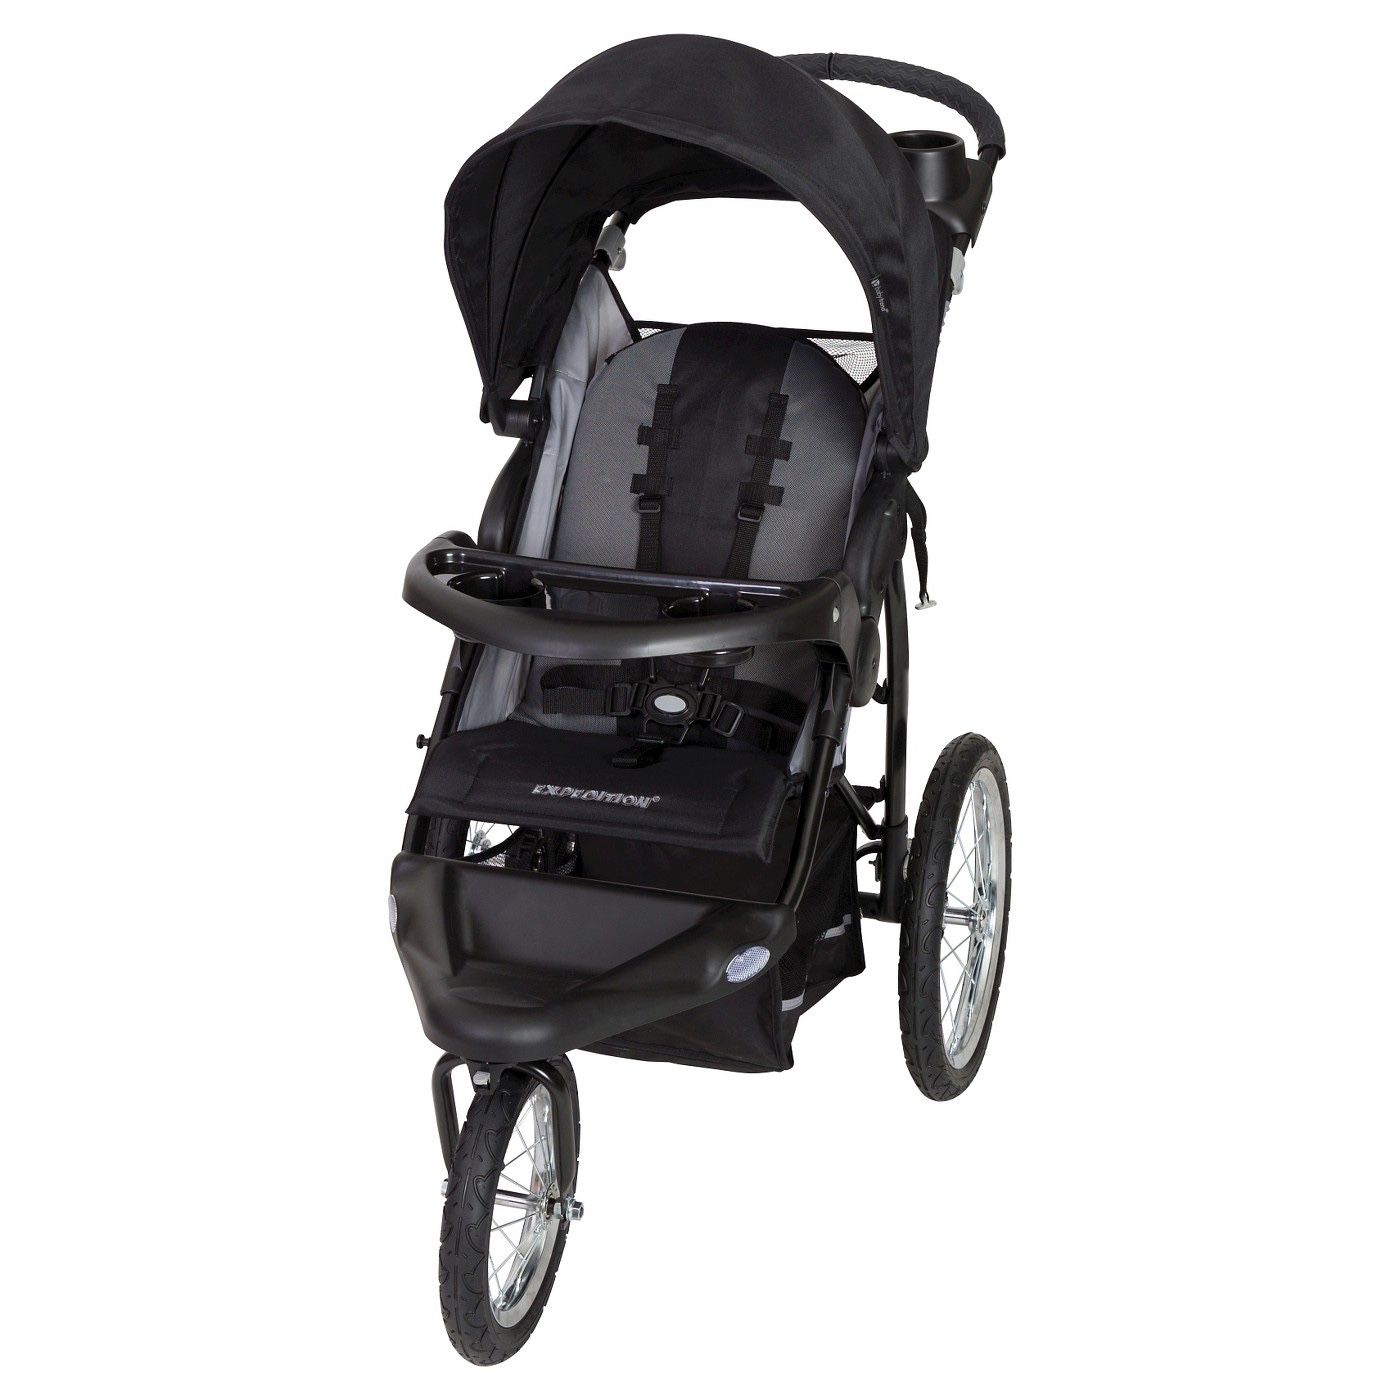 Baby Trend Expedition RG Jogger Stroller brand new, in box